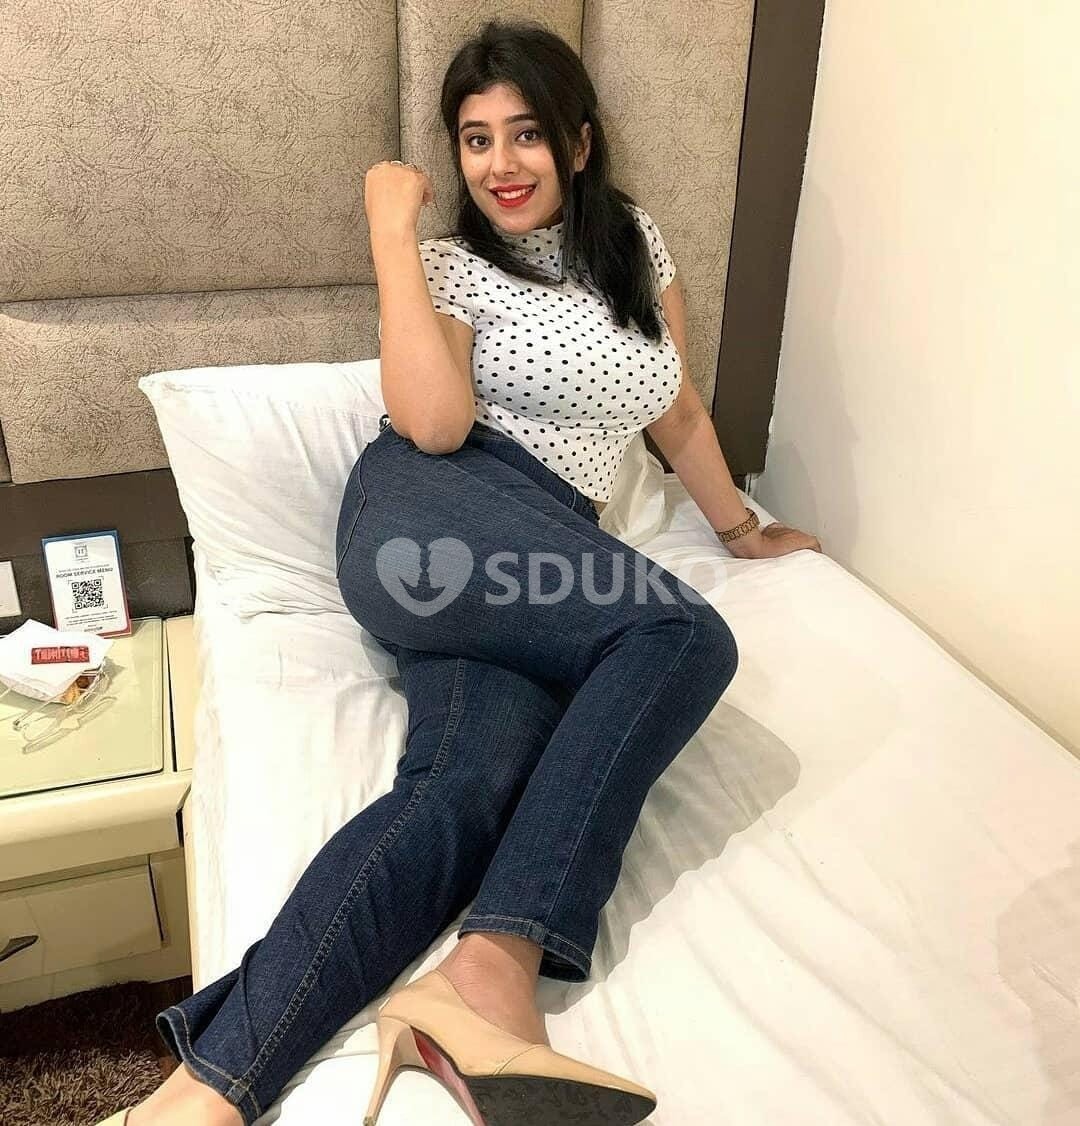 Banjara hills 100% guaranteed hot figure best high profile full safe and secure today low price college girl aunty now b